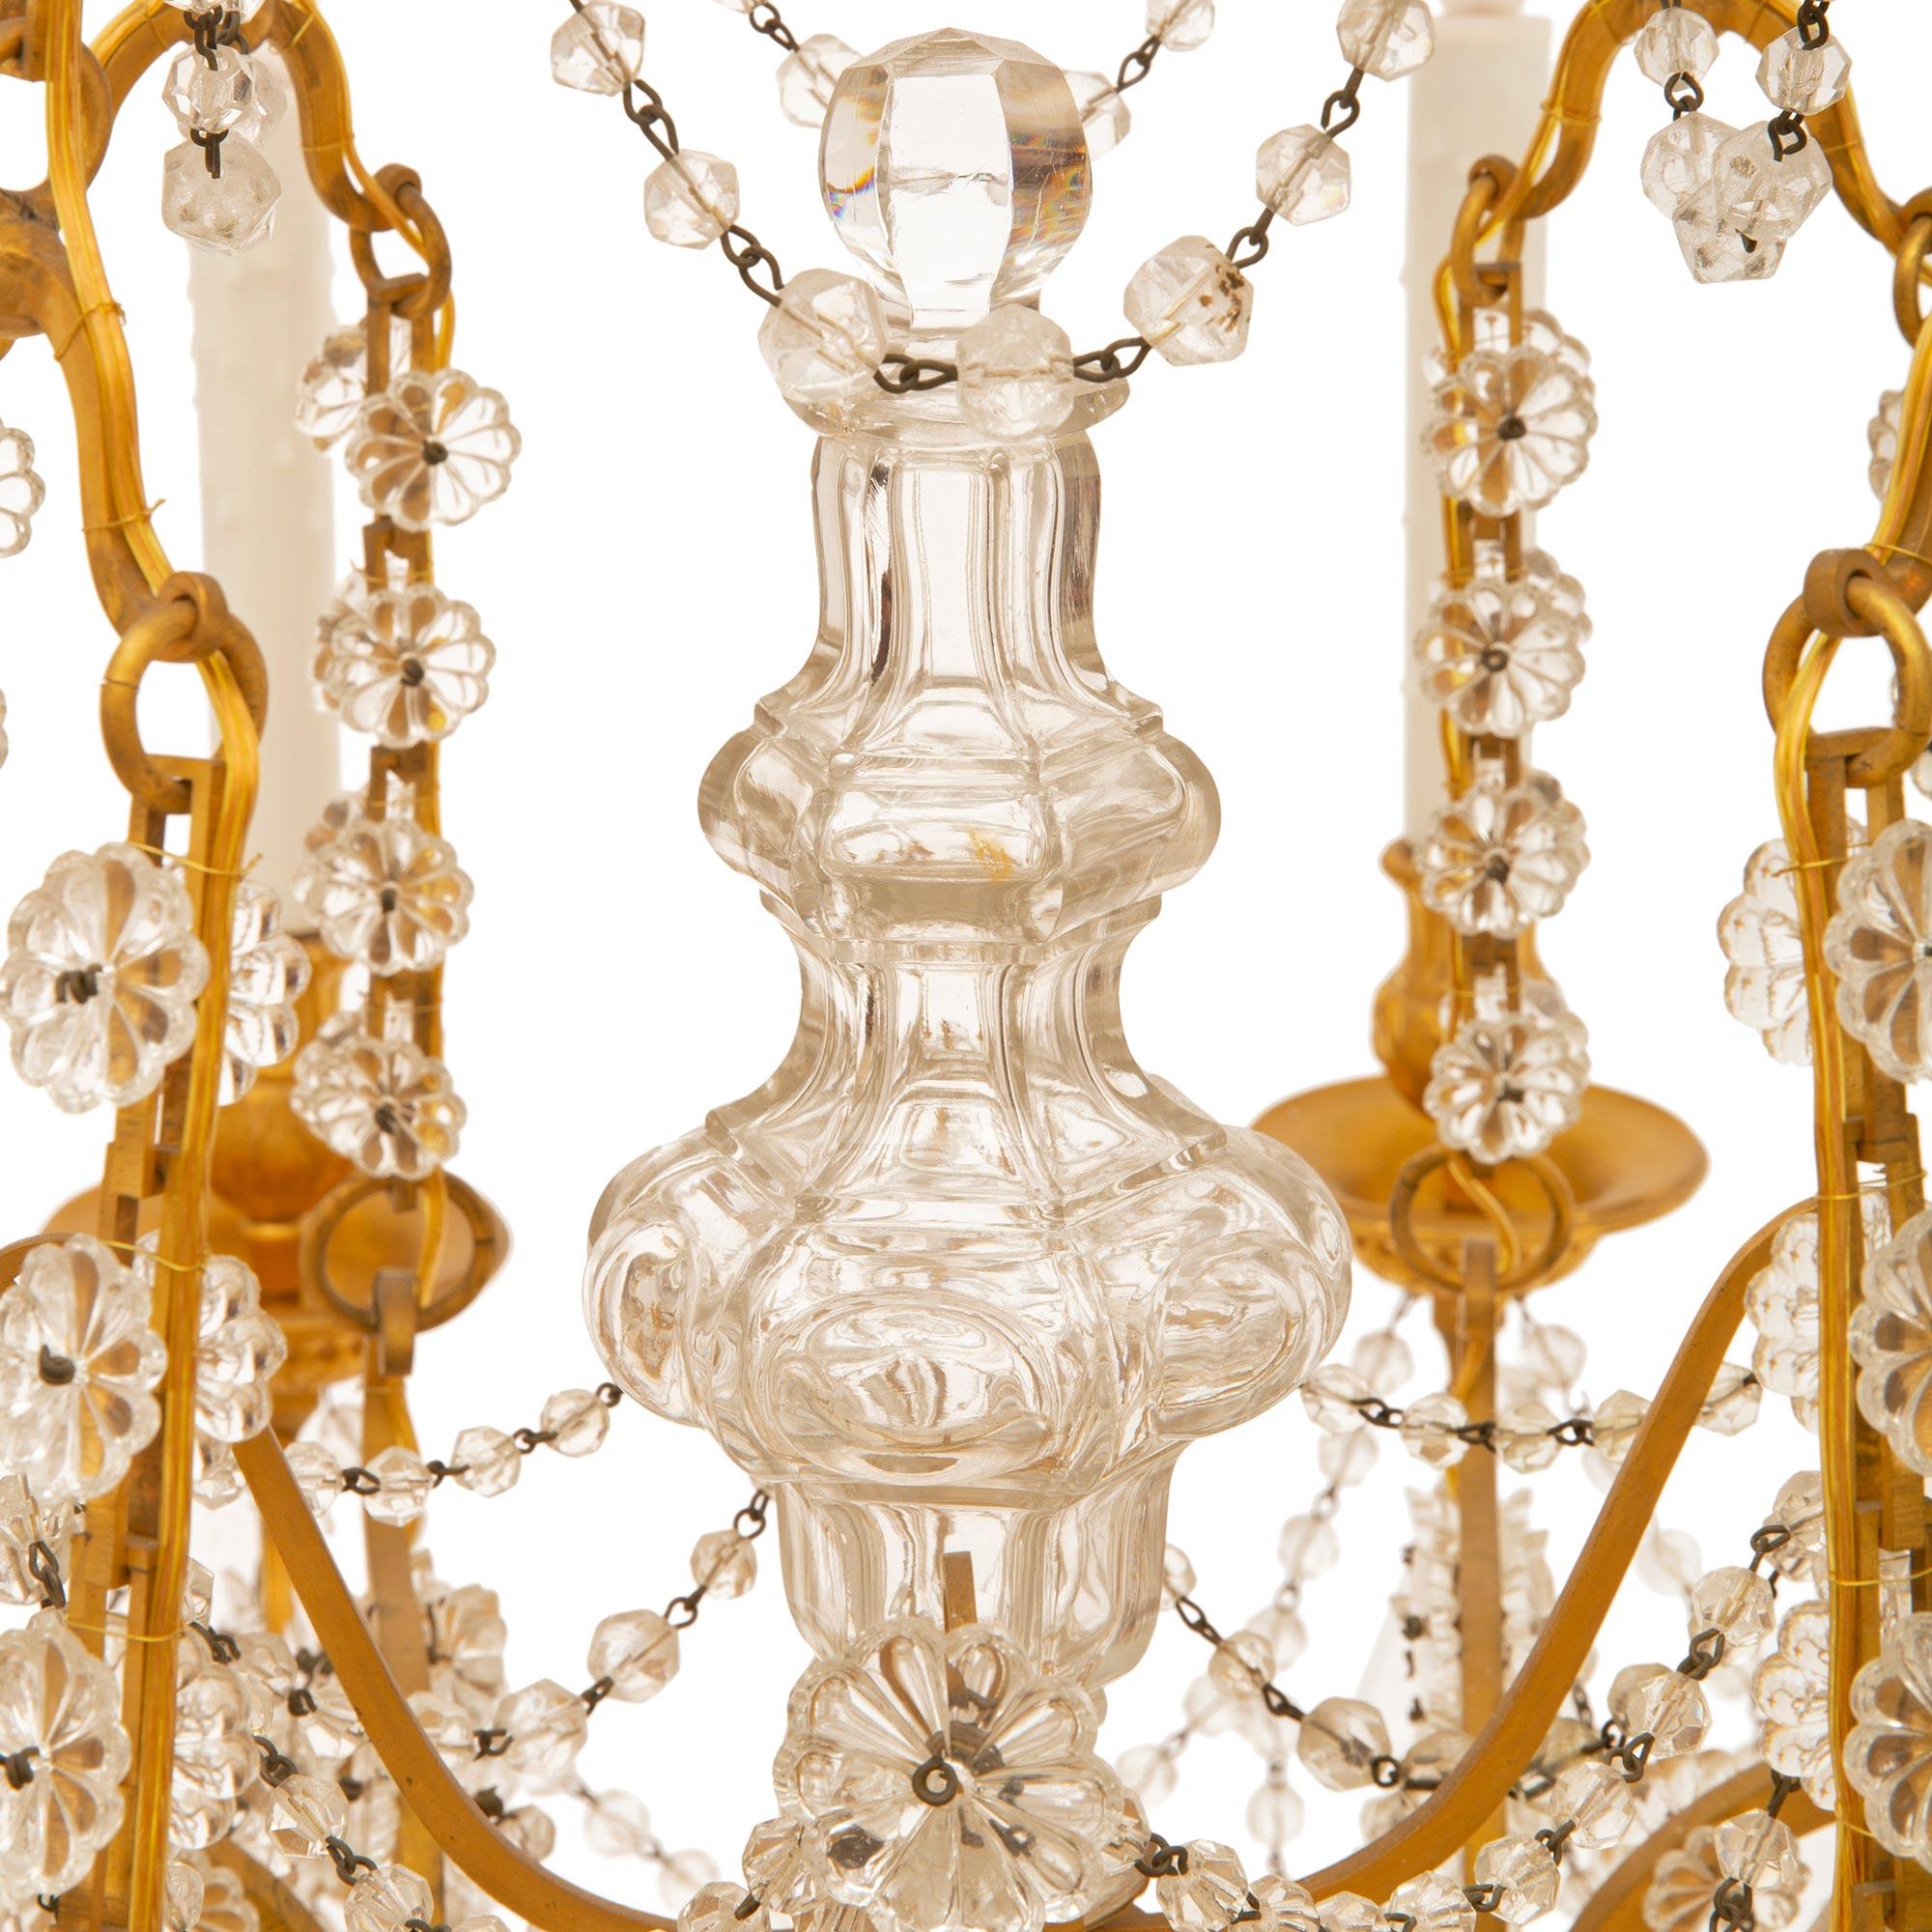 French 19th Century Louis XVI Style Eight-Light Baccarat Crystal Chandelier For Sale 2